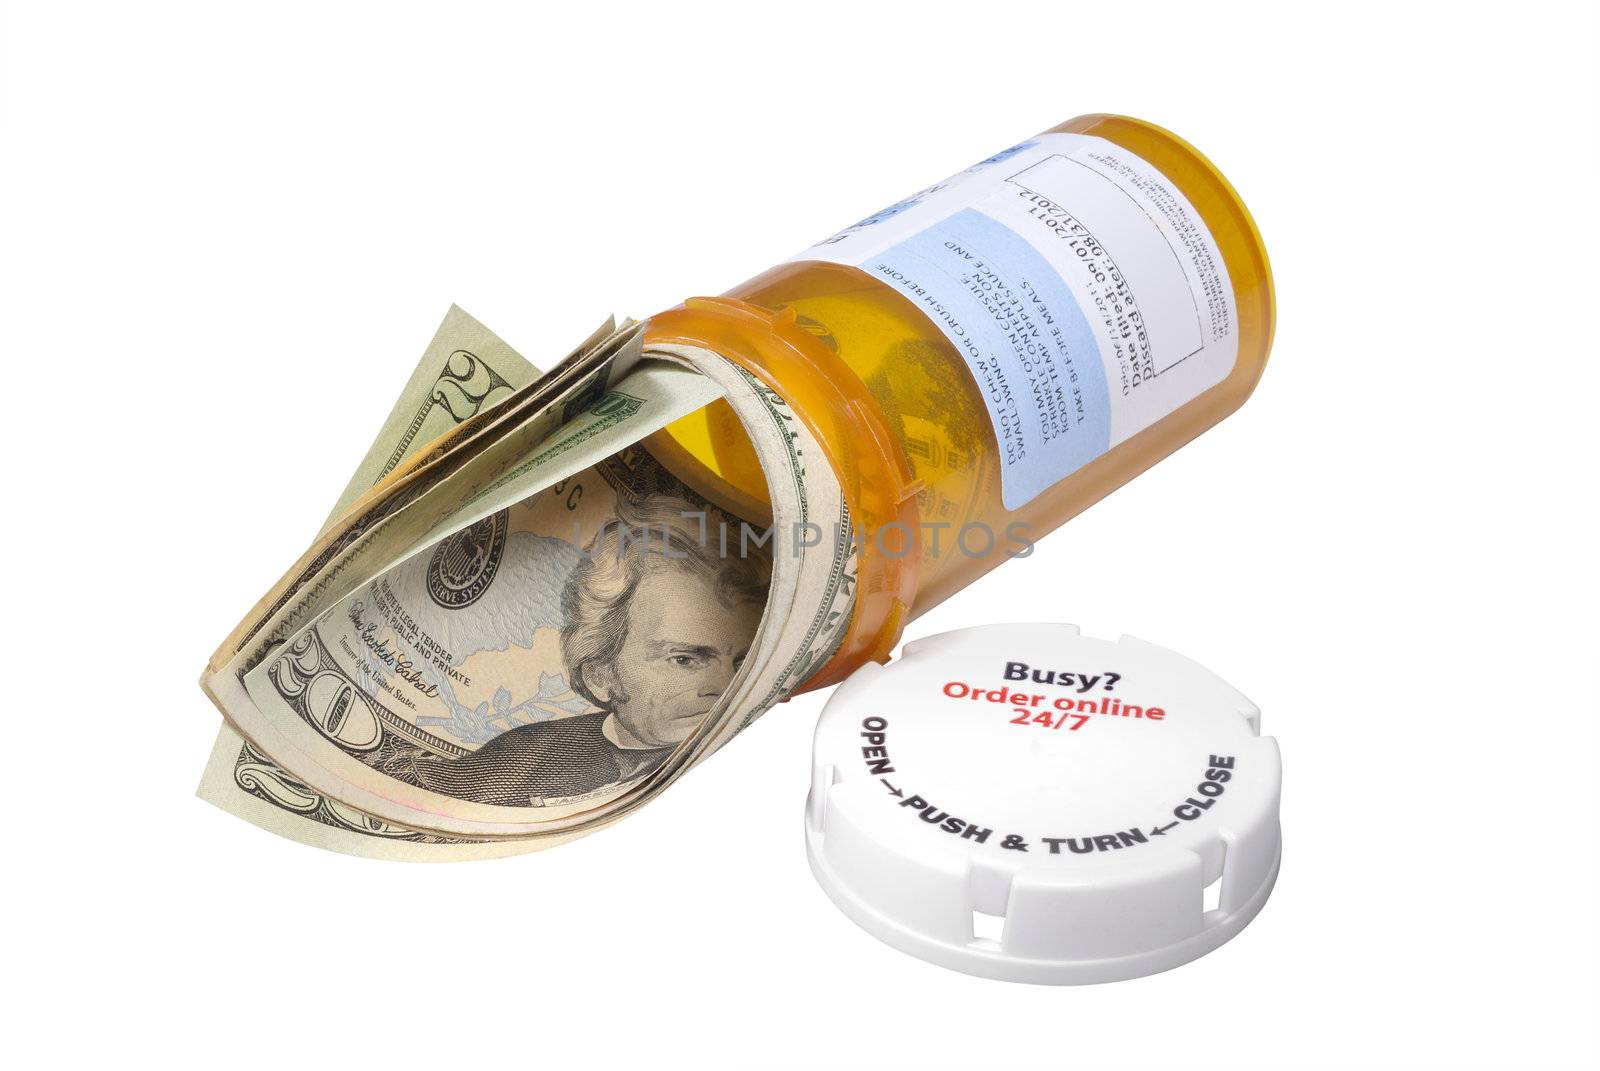 Prescription pill bottle with $20 bills inside. Concept or metaphor for cost of drugs. Isolated with clipping path